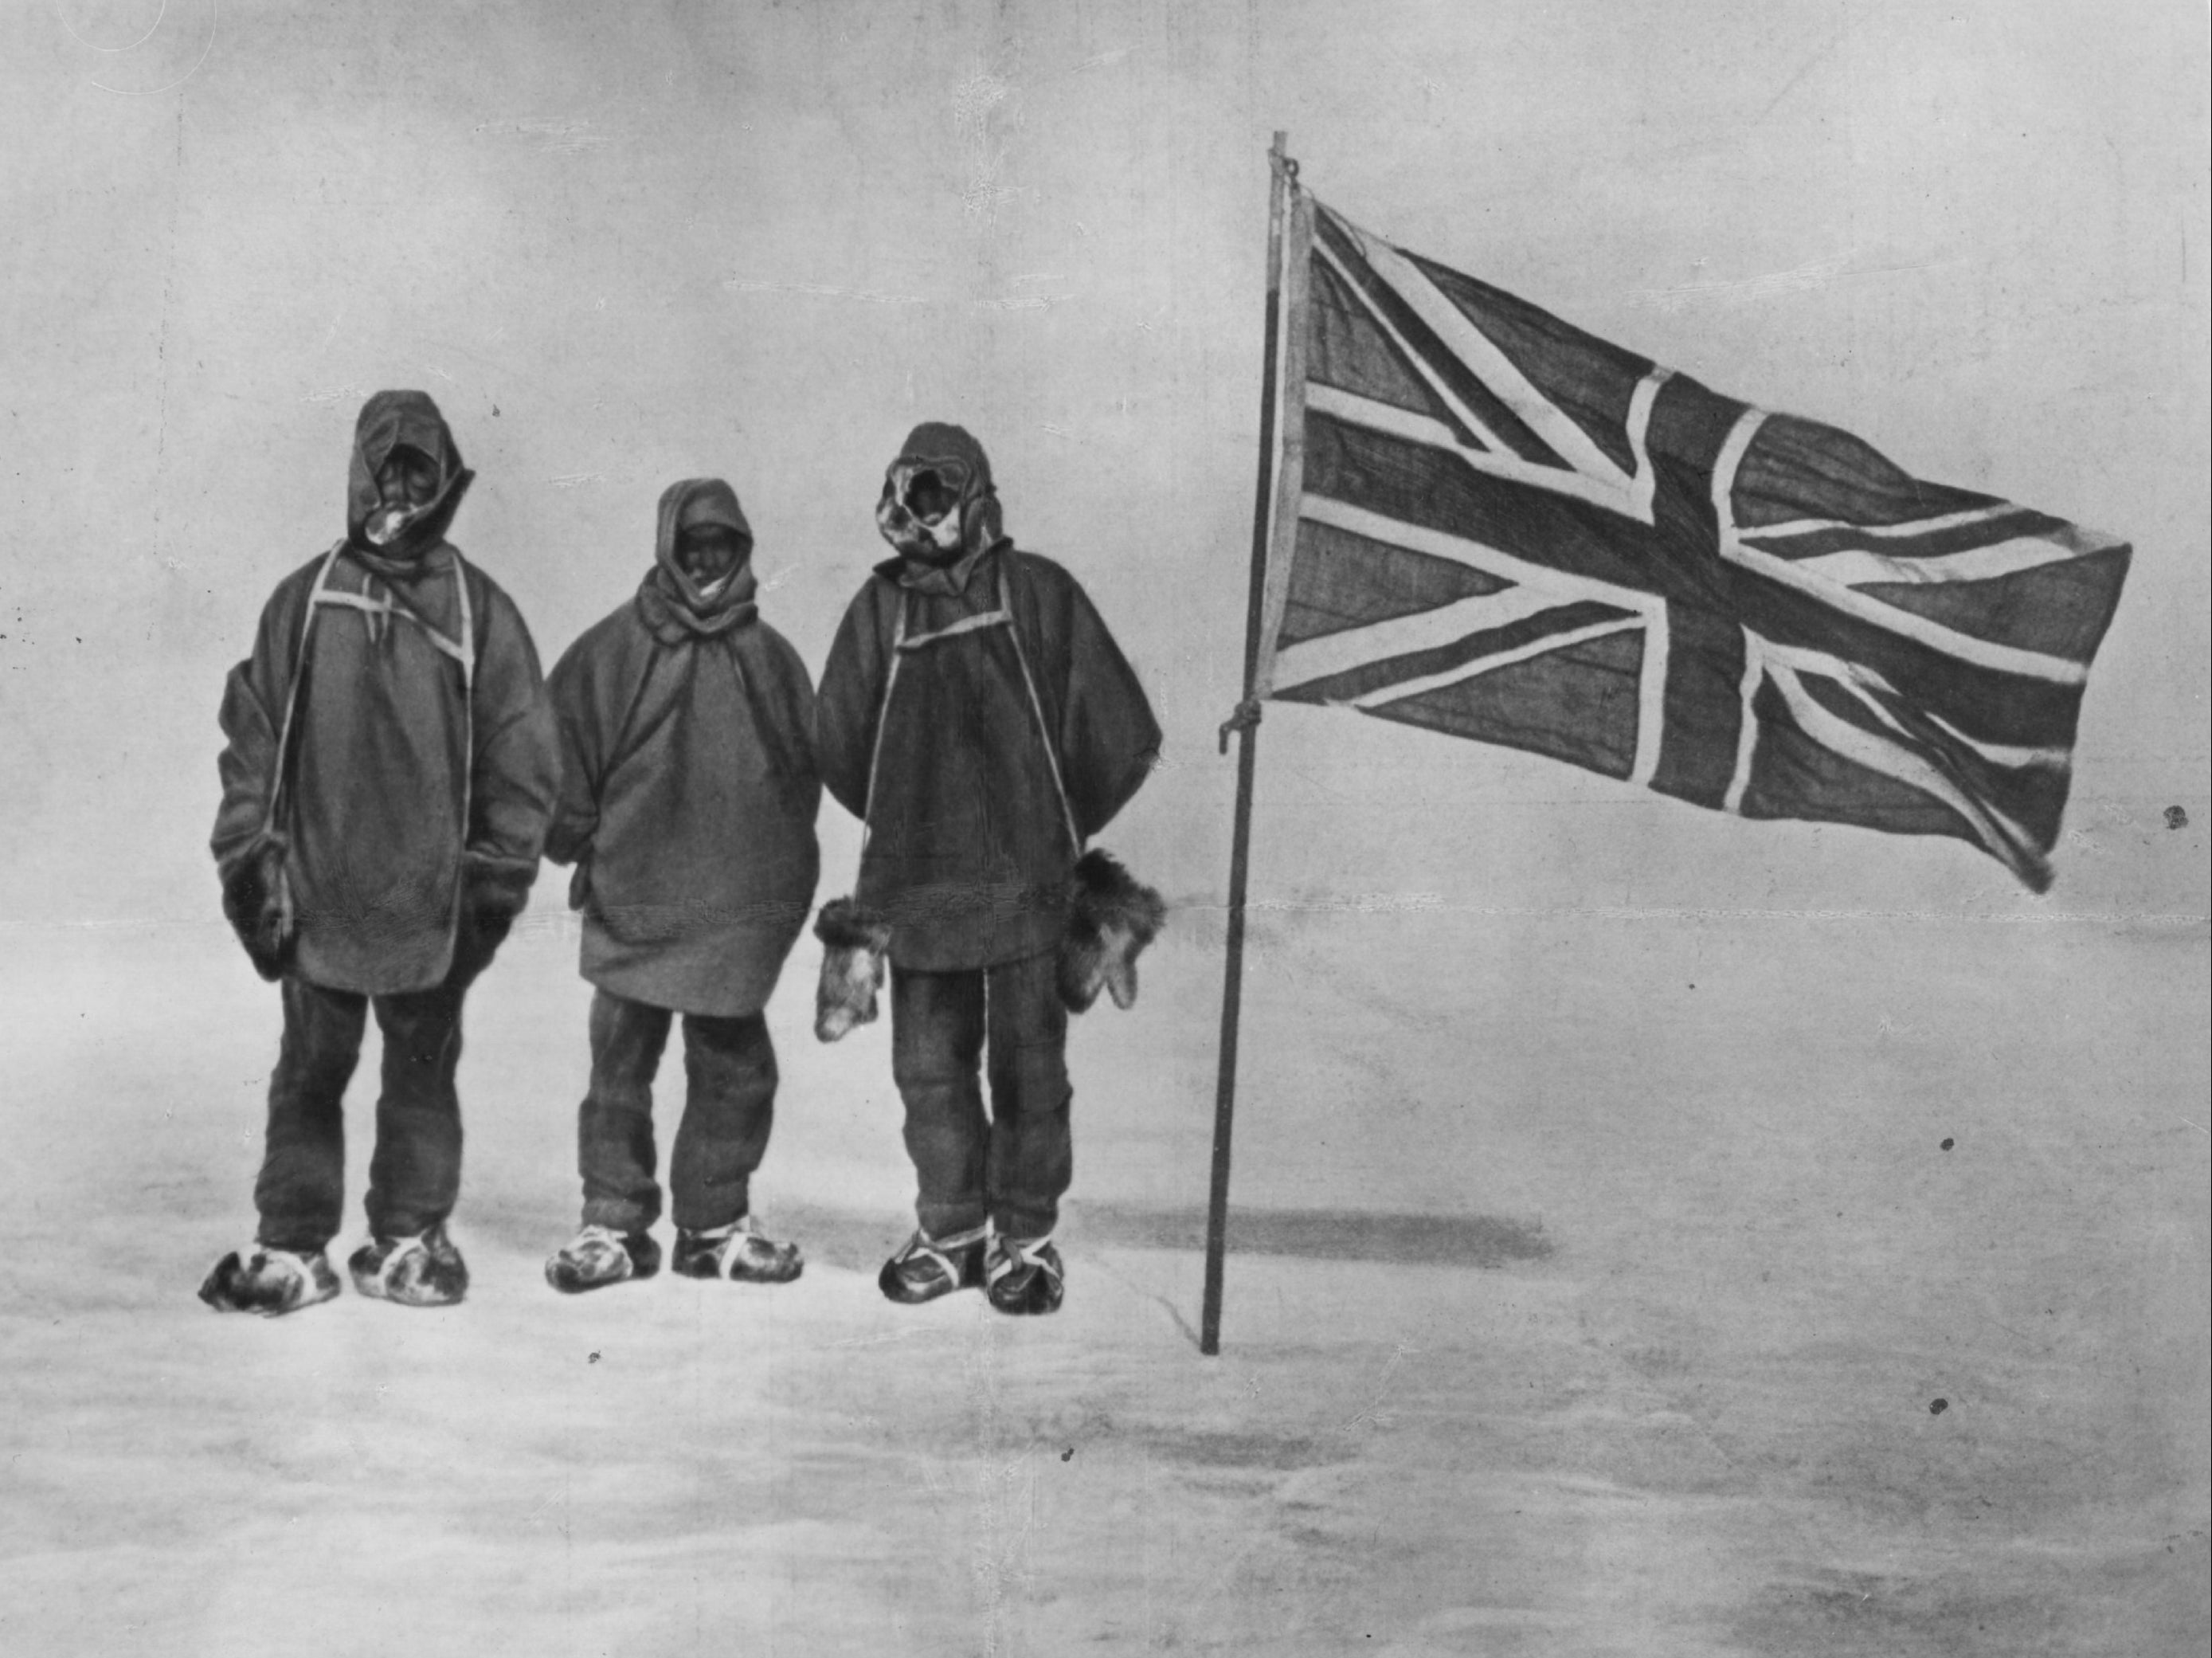 Sir Ernest Shackleto and two members of his expedition team beside a Union Jack within 111 miles of the South Pole